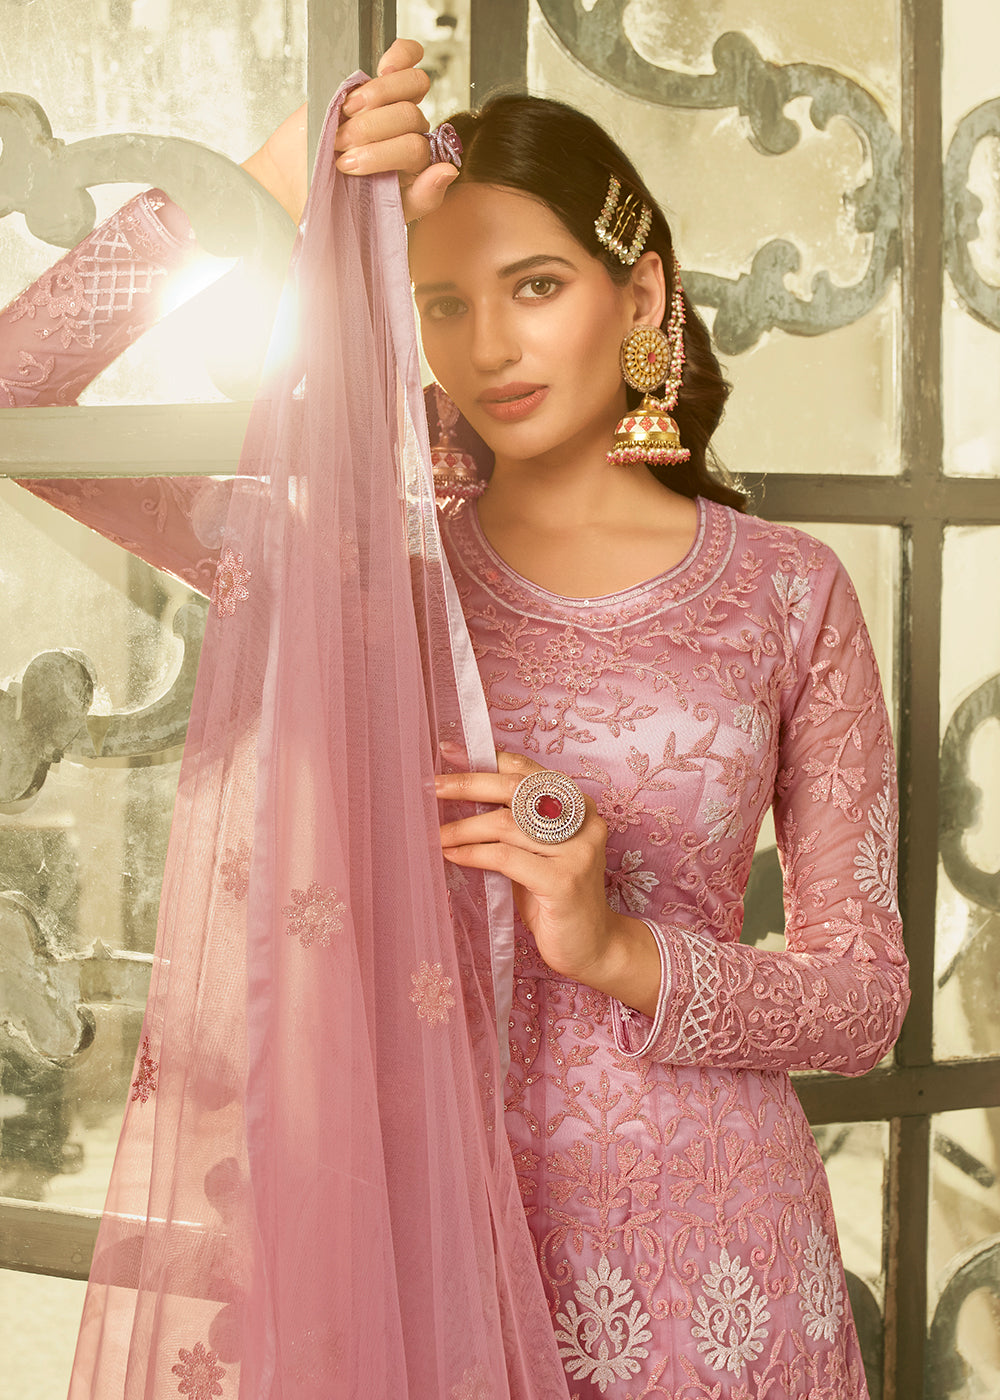 Buy Now Slit Style Majestic Pink Zari Embroidered Party Festive Anarkali Suit Online in USA, UK, Australia, New Zealand, Canada & Worldwide at Empress Clothing. 